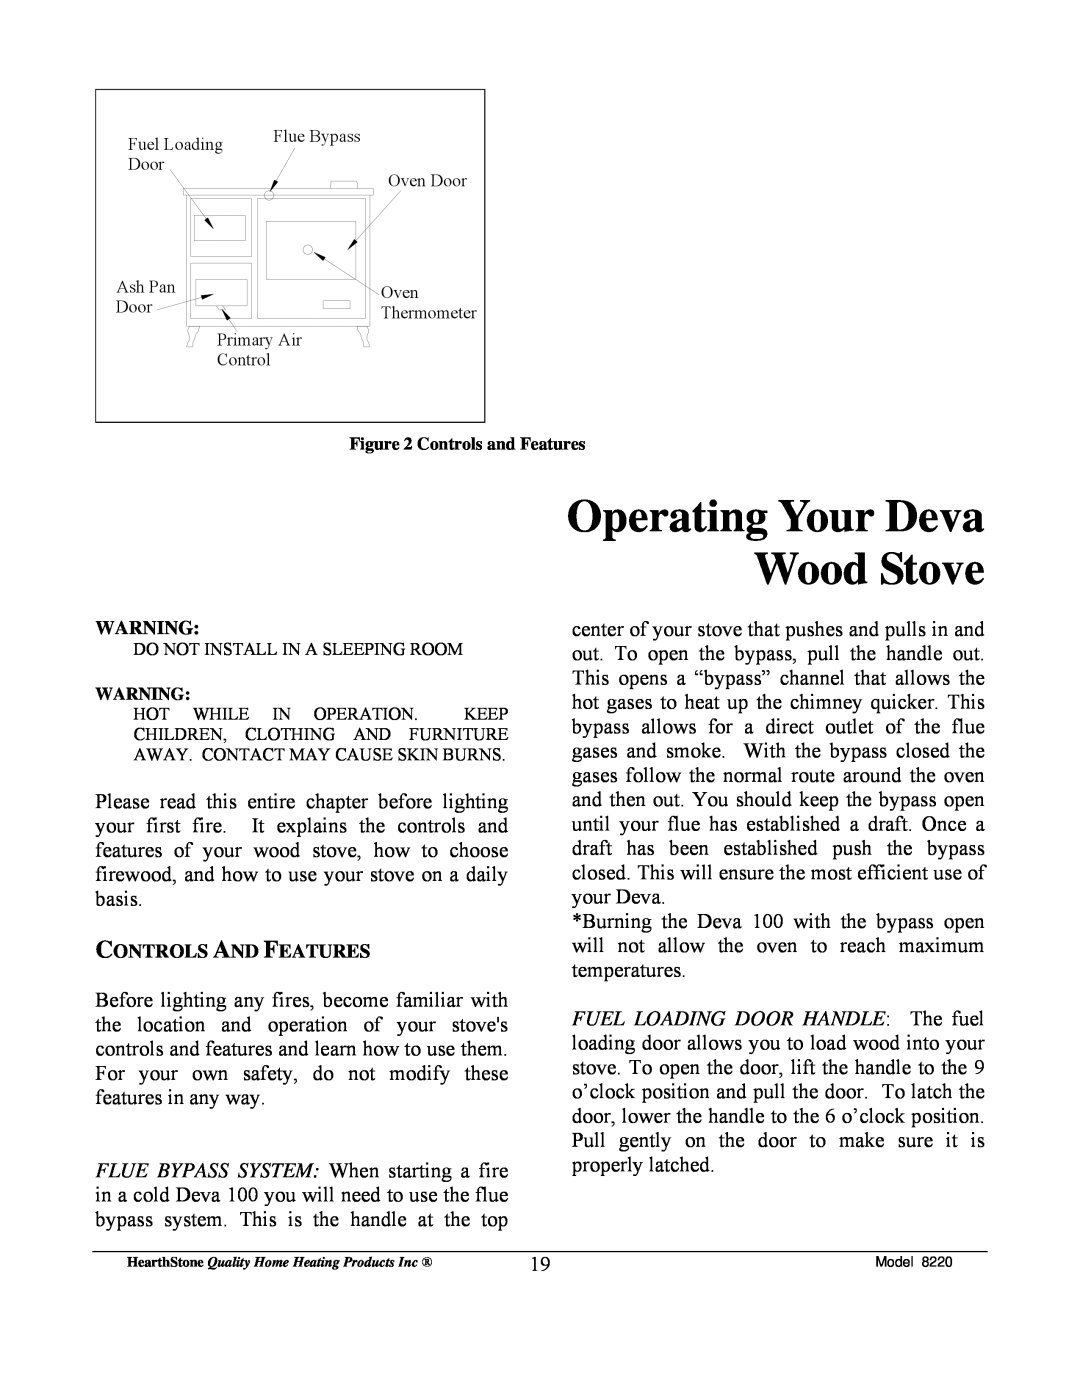 Weiman Products Deva 100 owner manual Operating Your Deva Wood Stove, Controls And Features 